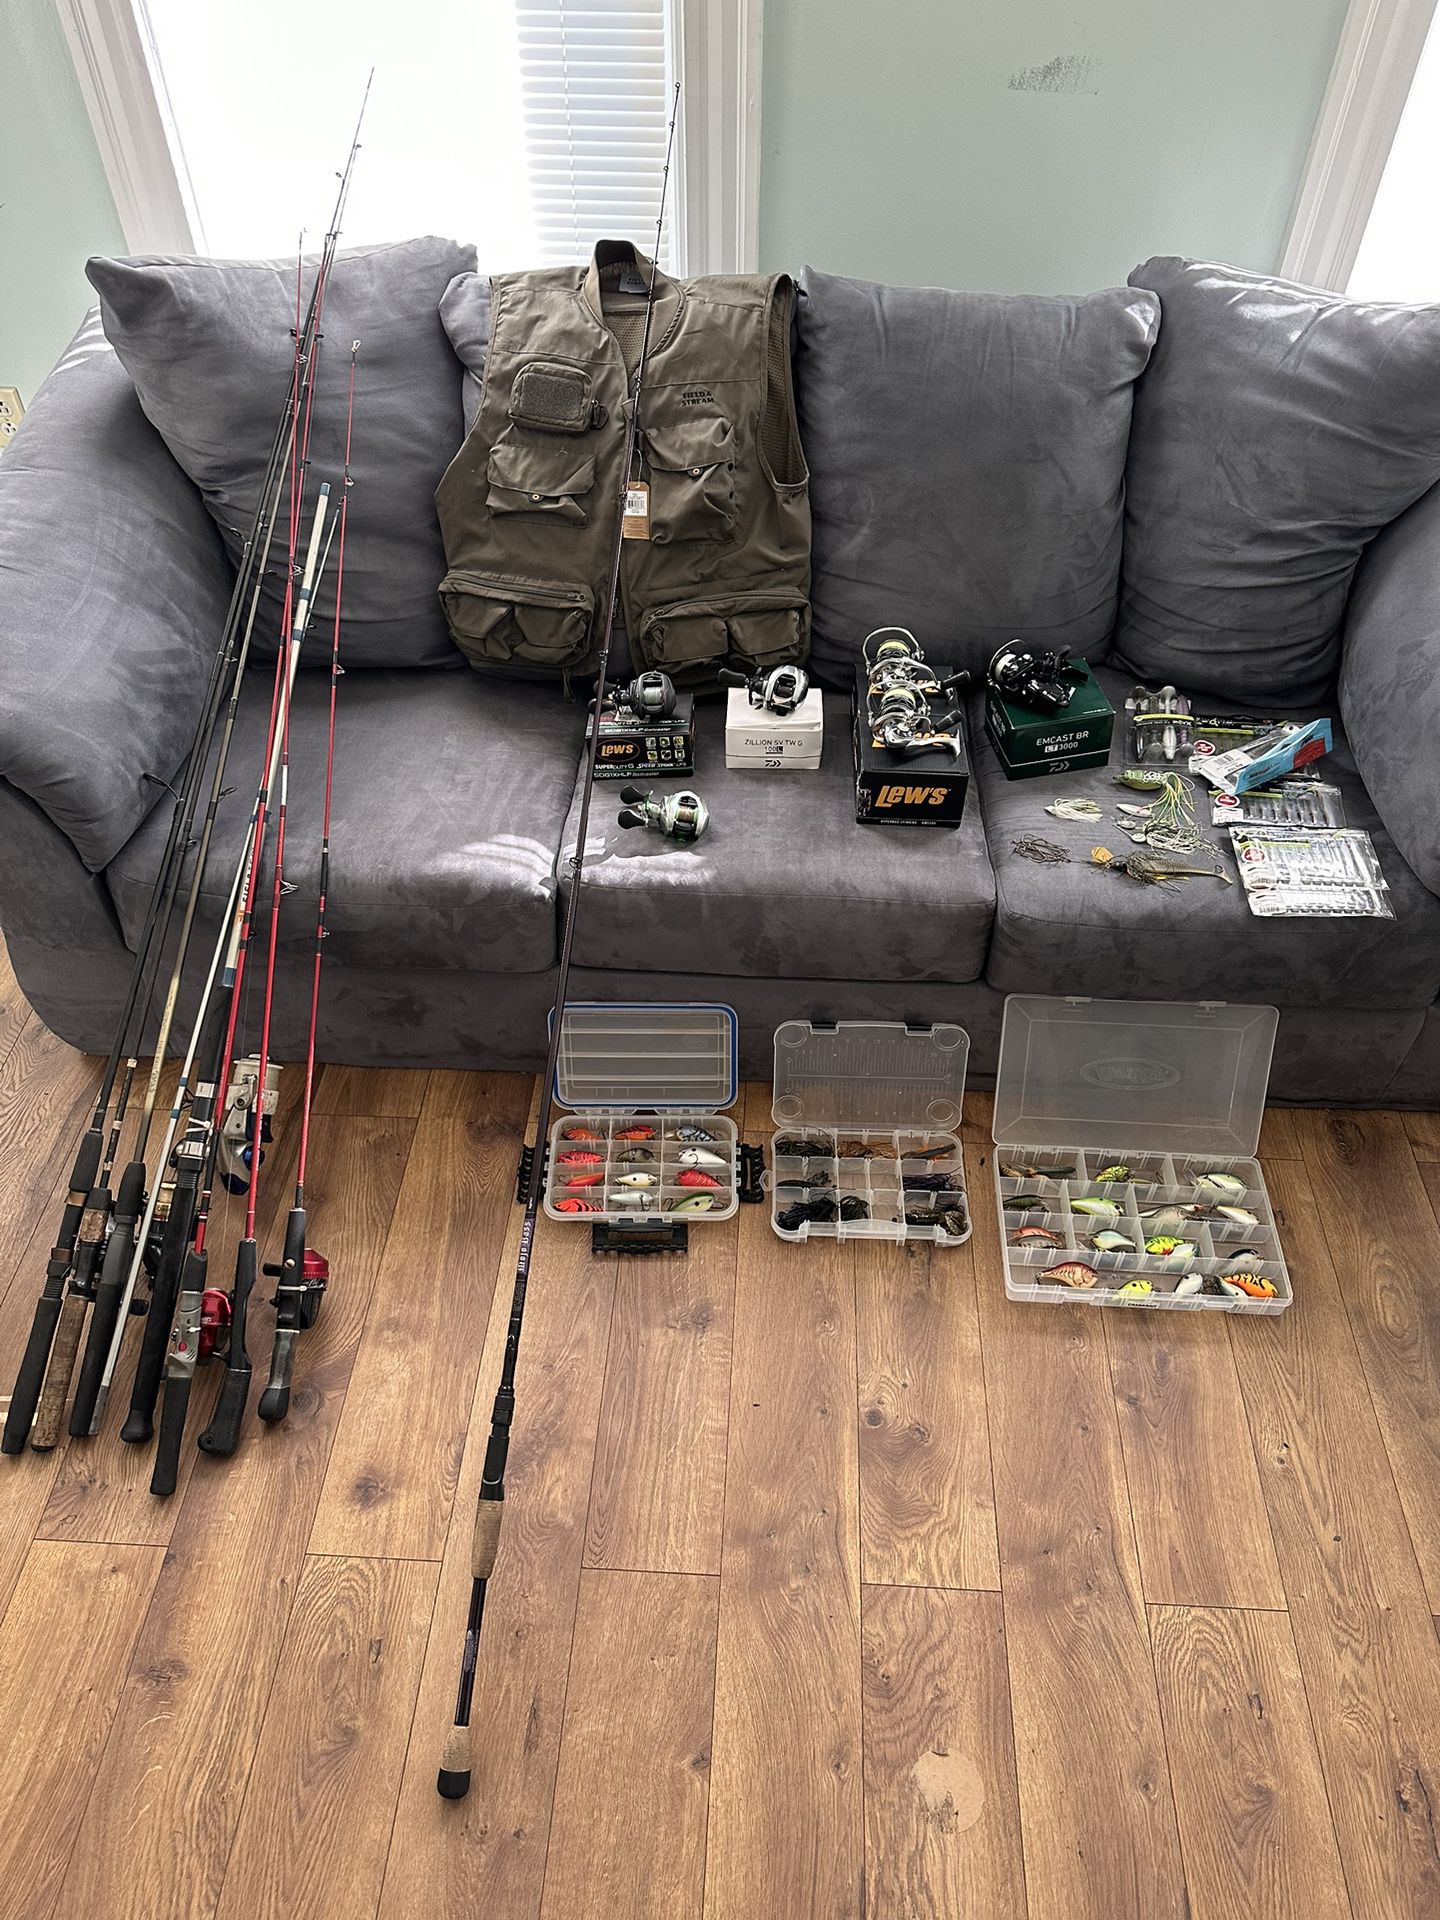 Fishing Gear / Tackle Great Condition & New! Rods, Reels, Vest, Lures, Hard & Soft Baits, Etc…